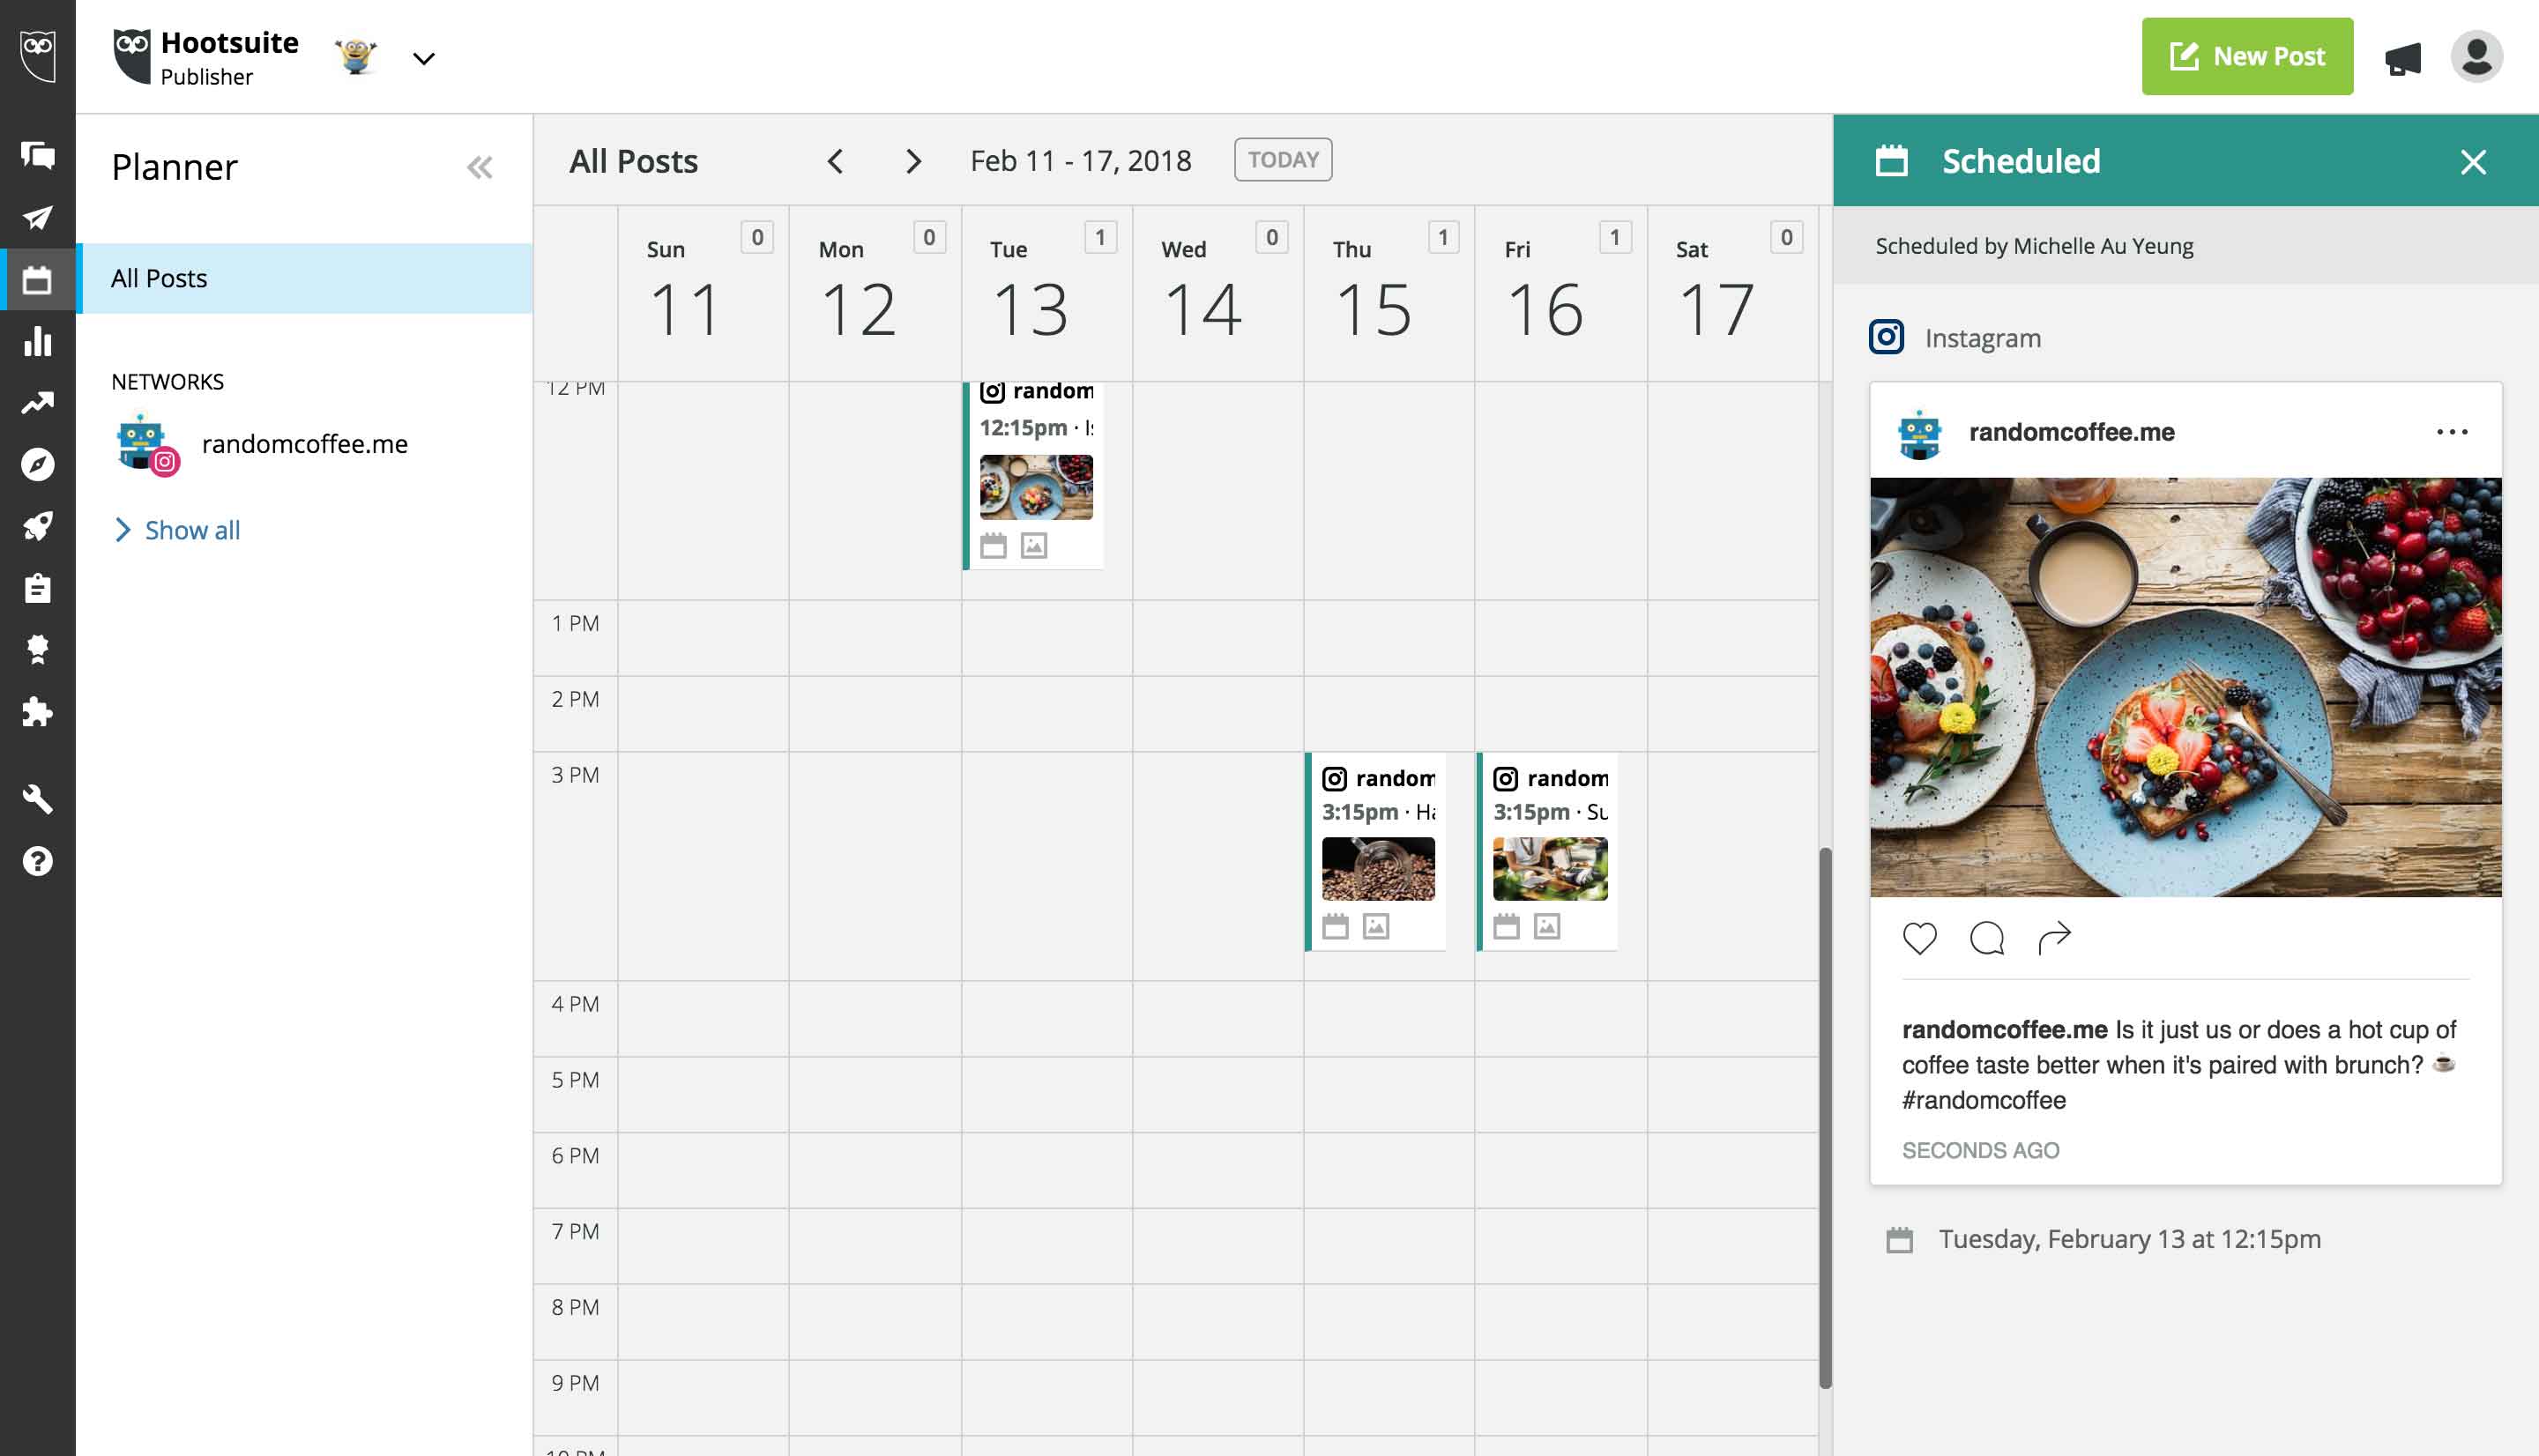 Instagram announced Post Scheduling for Businesses